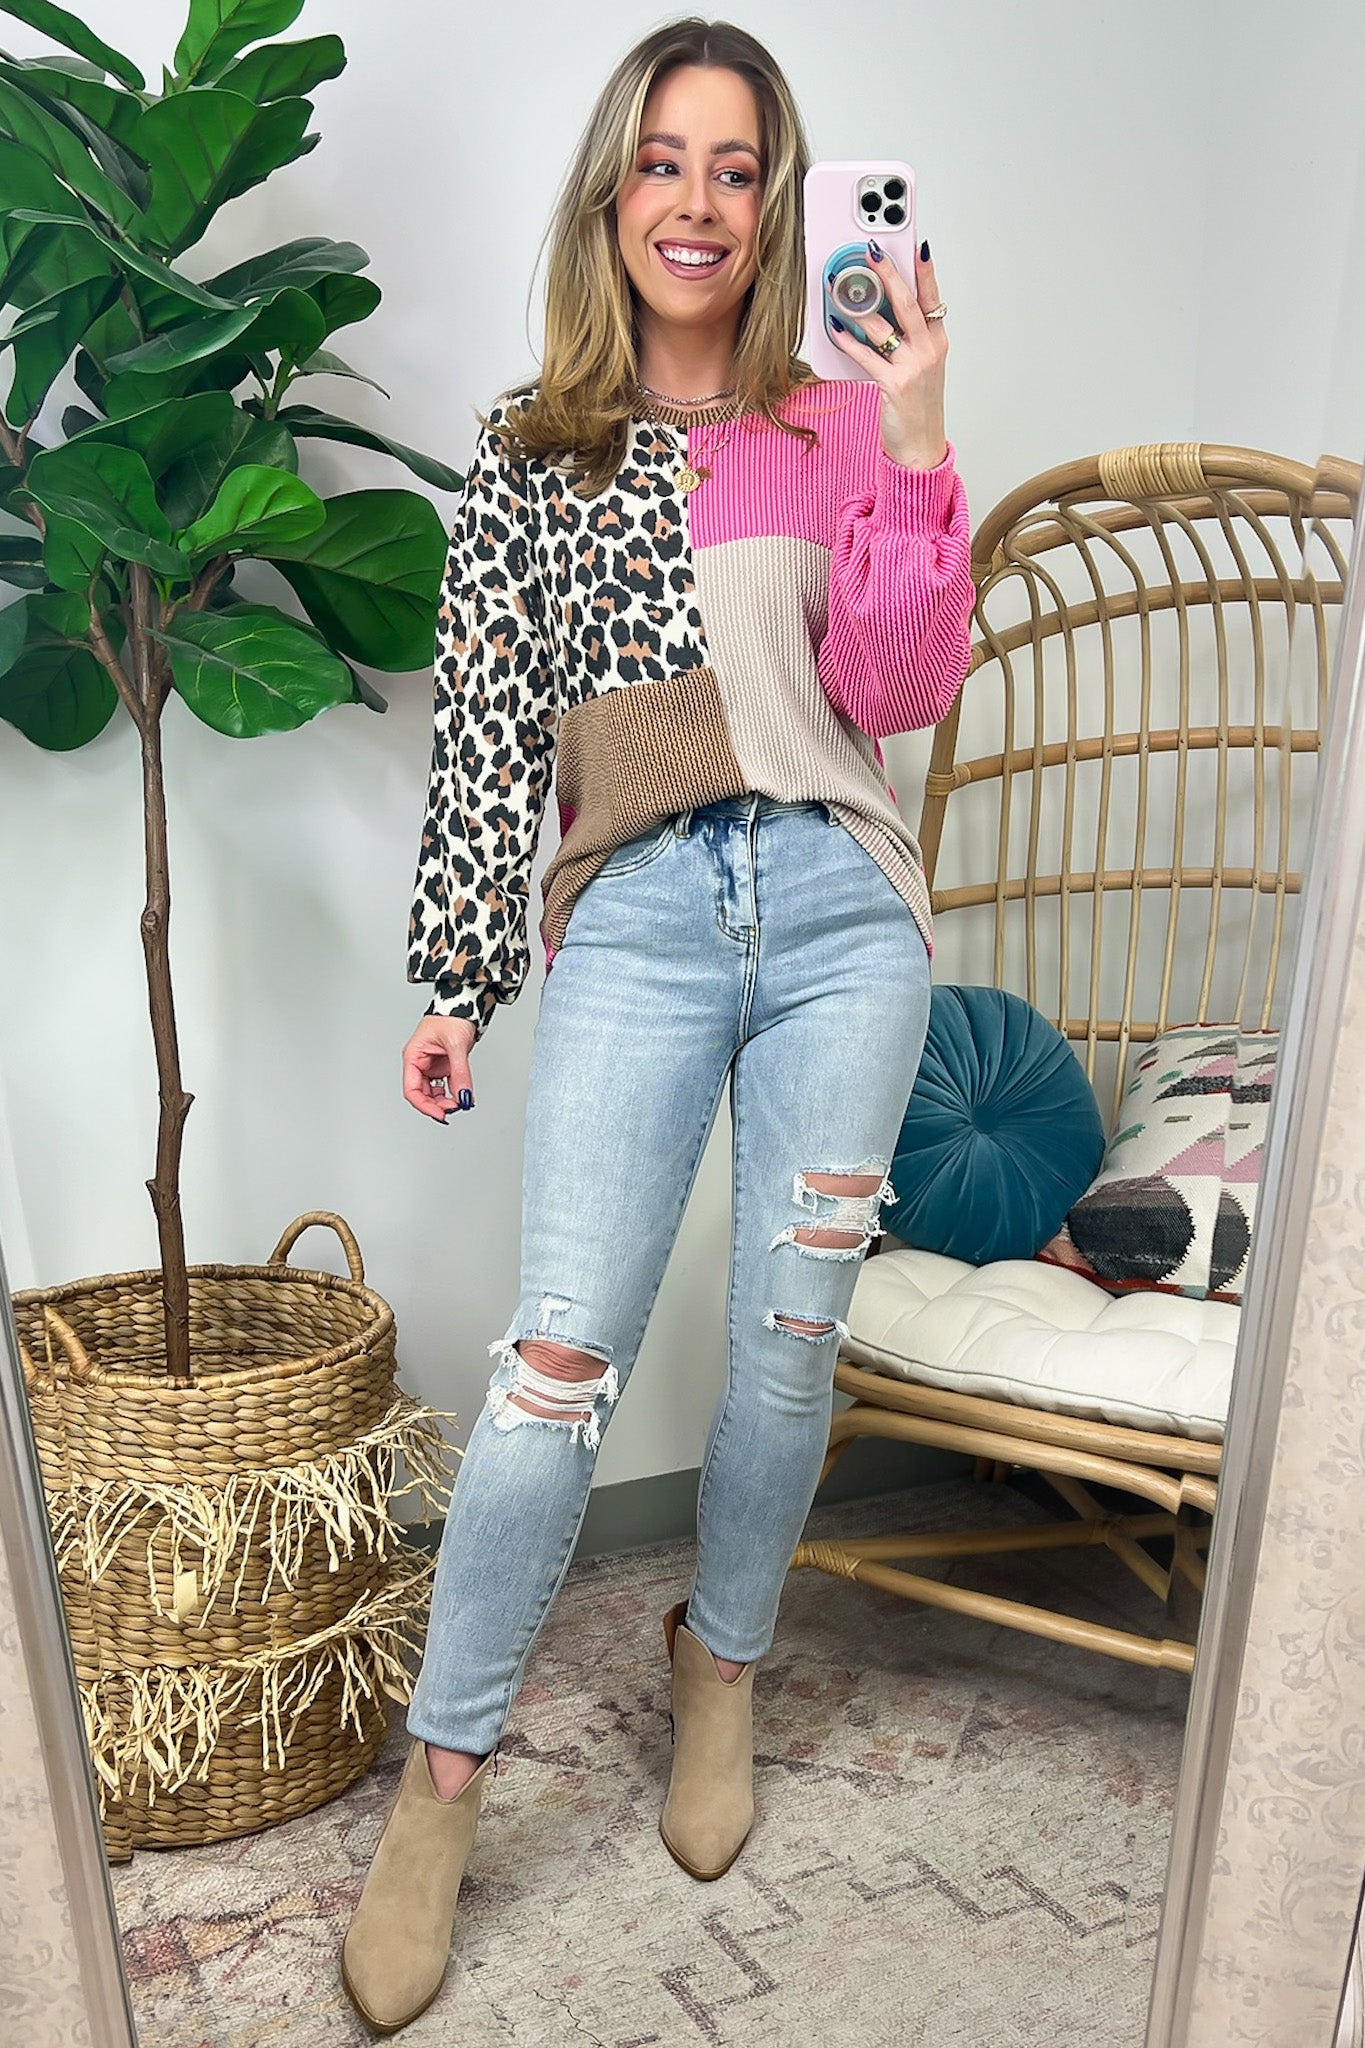  Elym Animal Print Color Block Top - Madison and Mallory